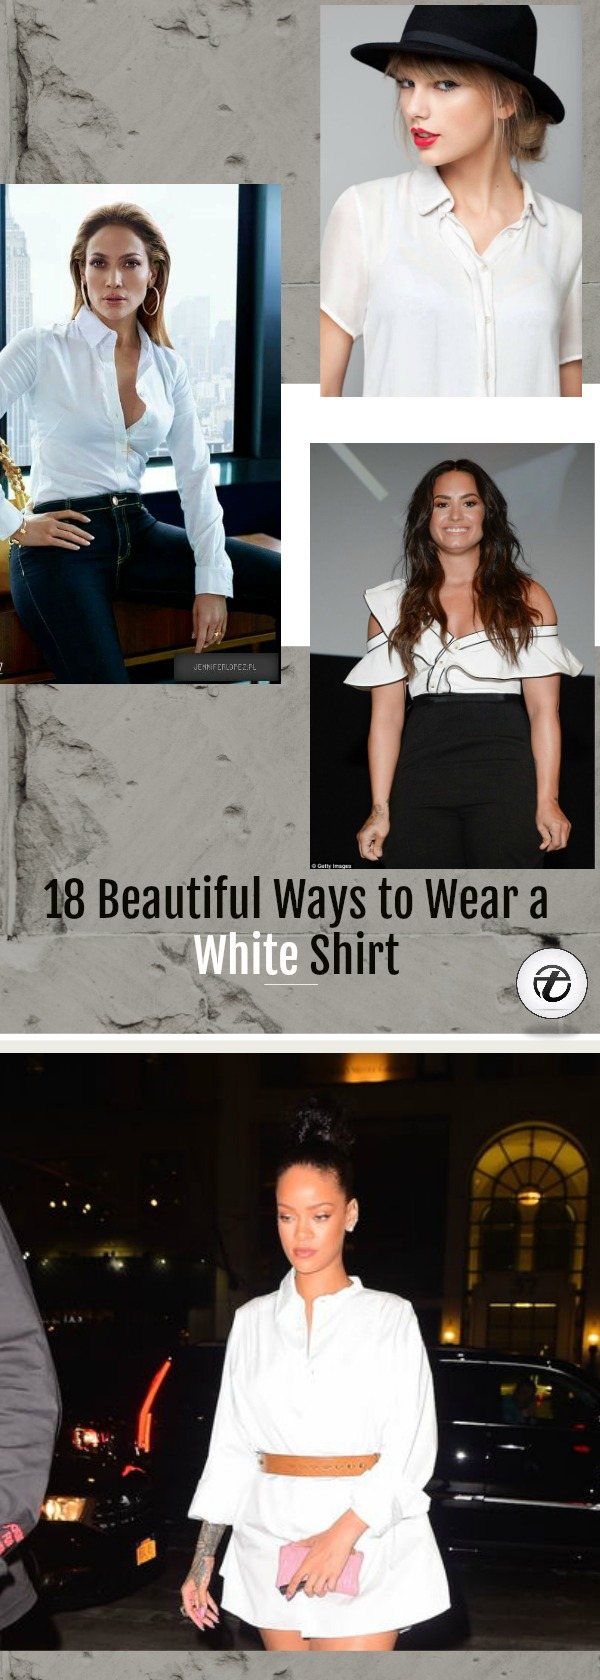 different ways to wear a white shirt